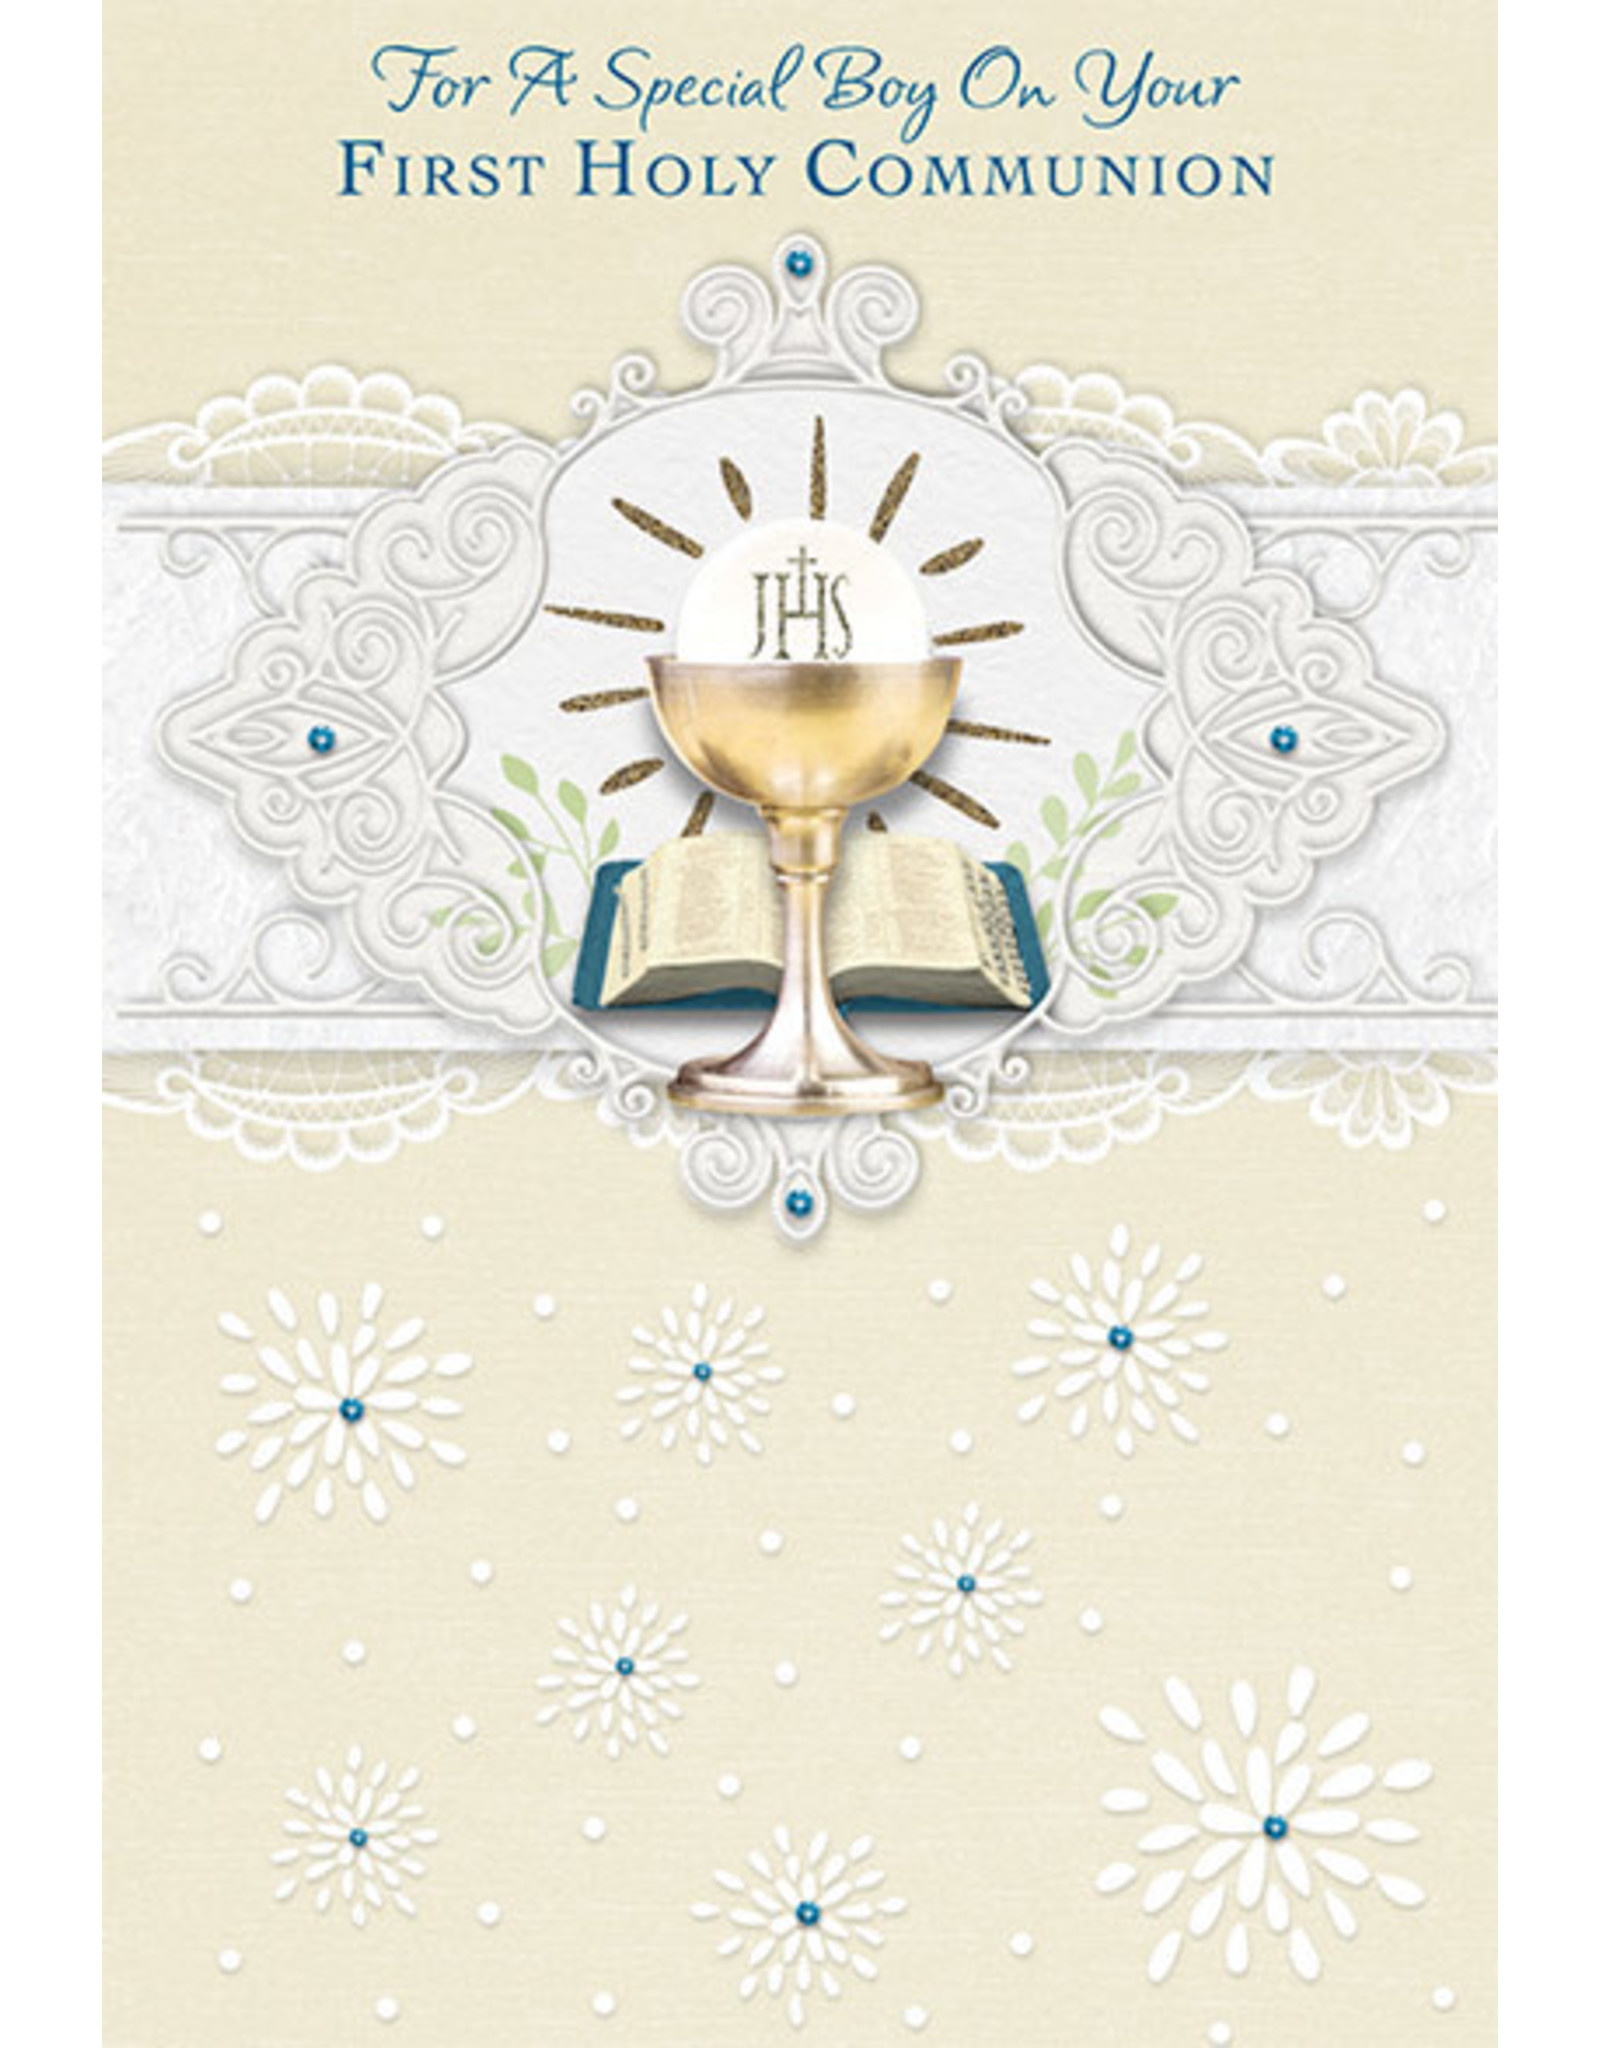 Greetings of Faith Card - First Communion (Boy), White Lace Detailing